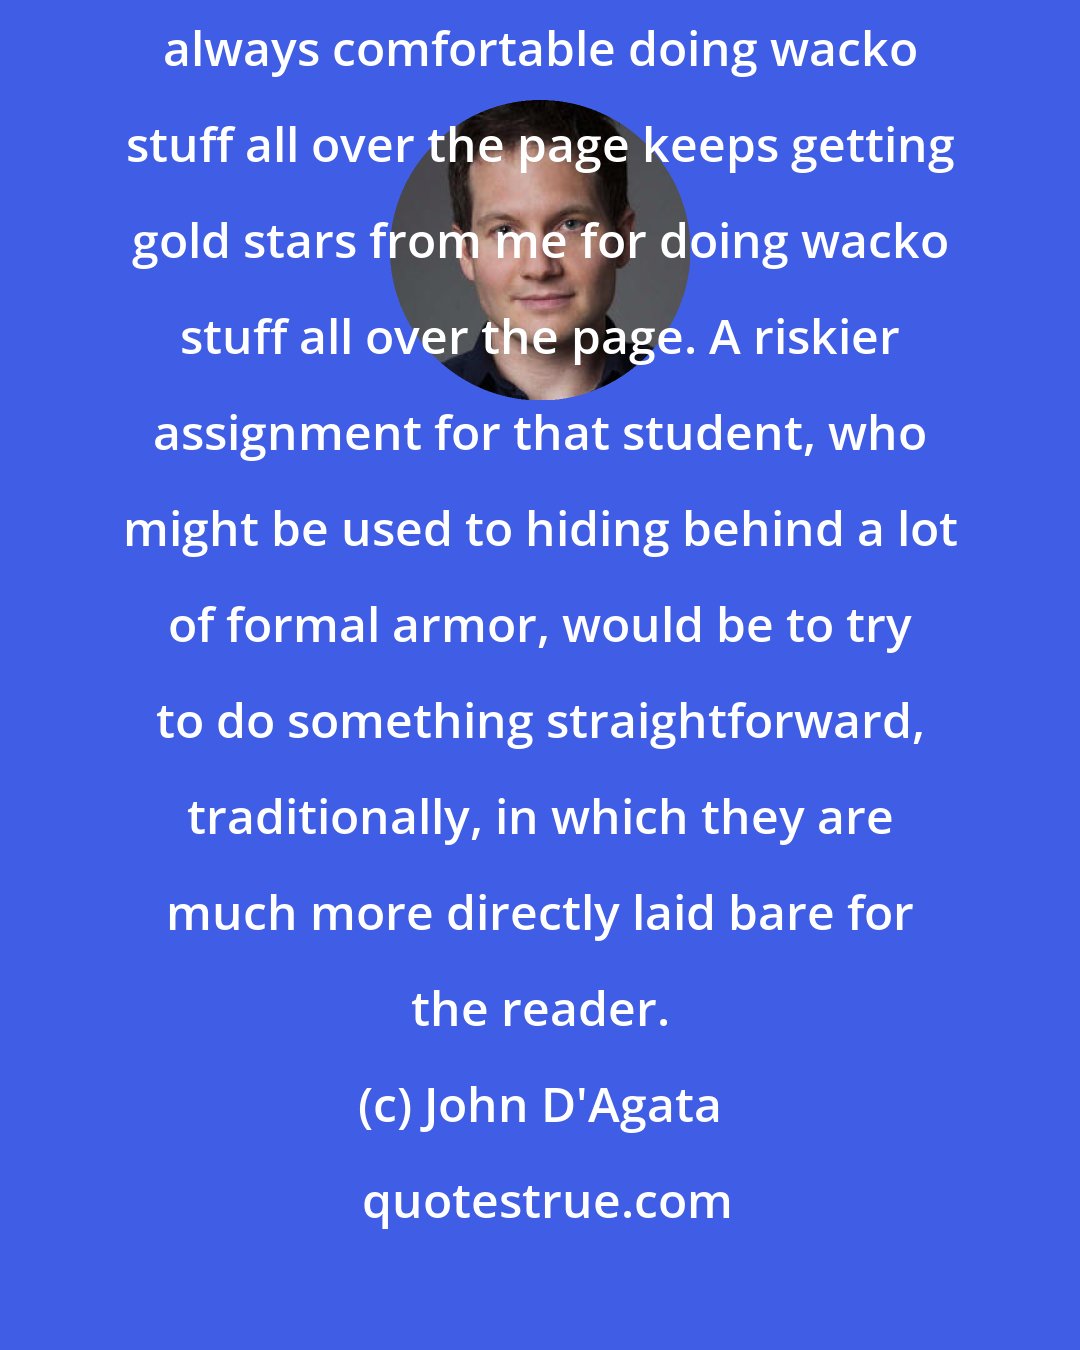 John D'Agata: When I'm teaching, I'm not really doing my job if the student who's always comfortable doing wacko stuff all over the page keeps getting gold stars from me for doing wacko stuff all over the page. A riskier assignment for that student, who might be used to hiding behind a lot of formal armor, would be to try to do something straightforward, traditionally, in which they are much more directly laid bare for the reader.